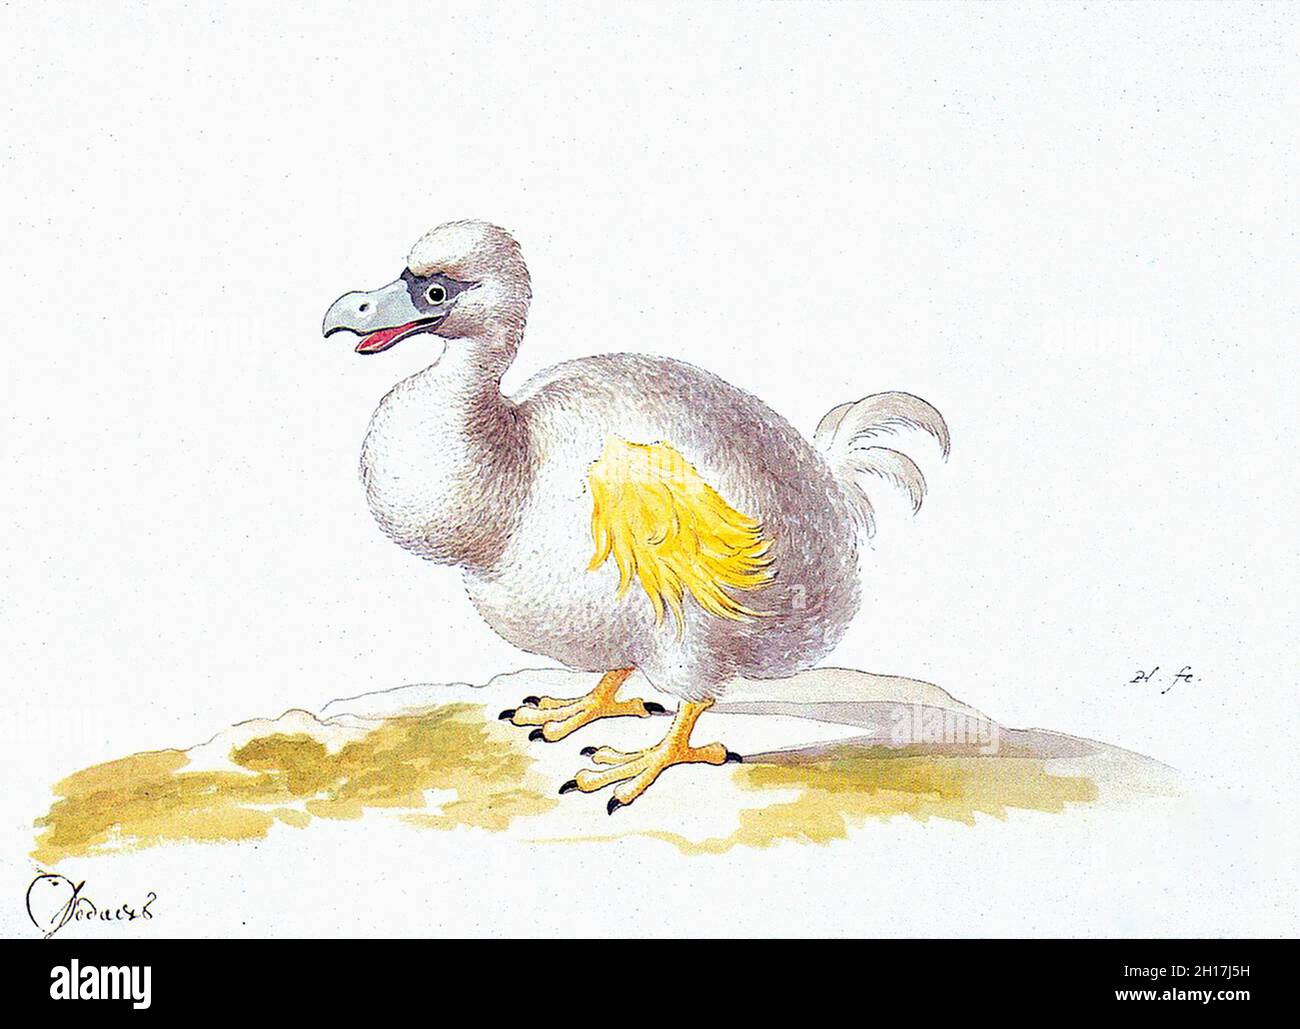 Dodo - White Dodo - Painting of a white dodo, based on a painting form 1611 by Roelant Savery Stock Photo